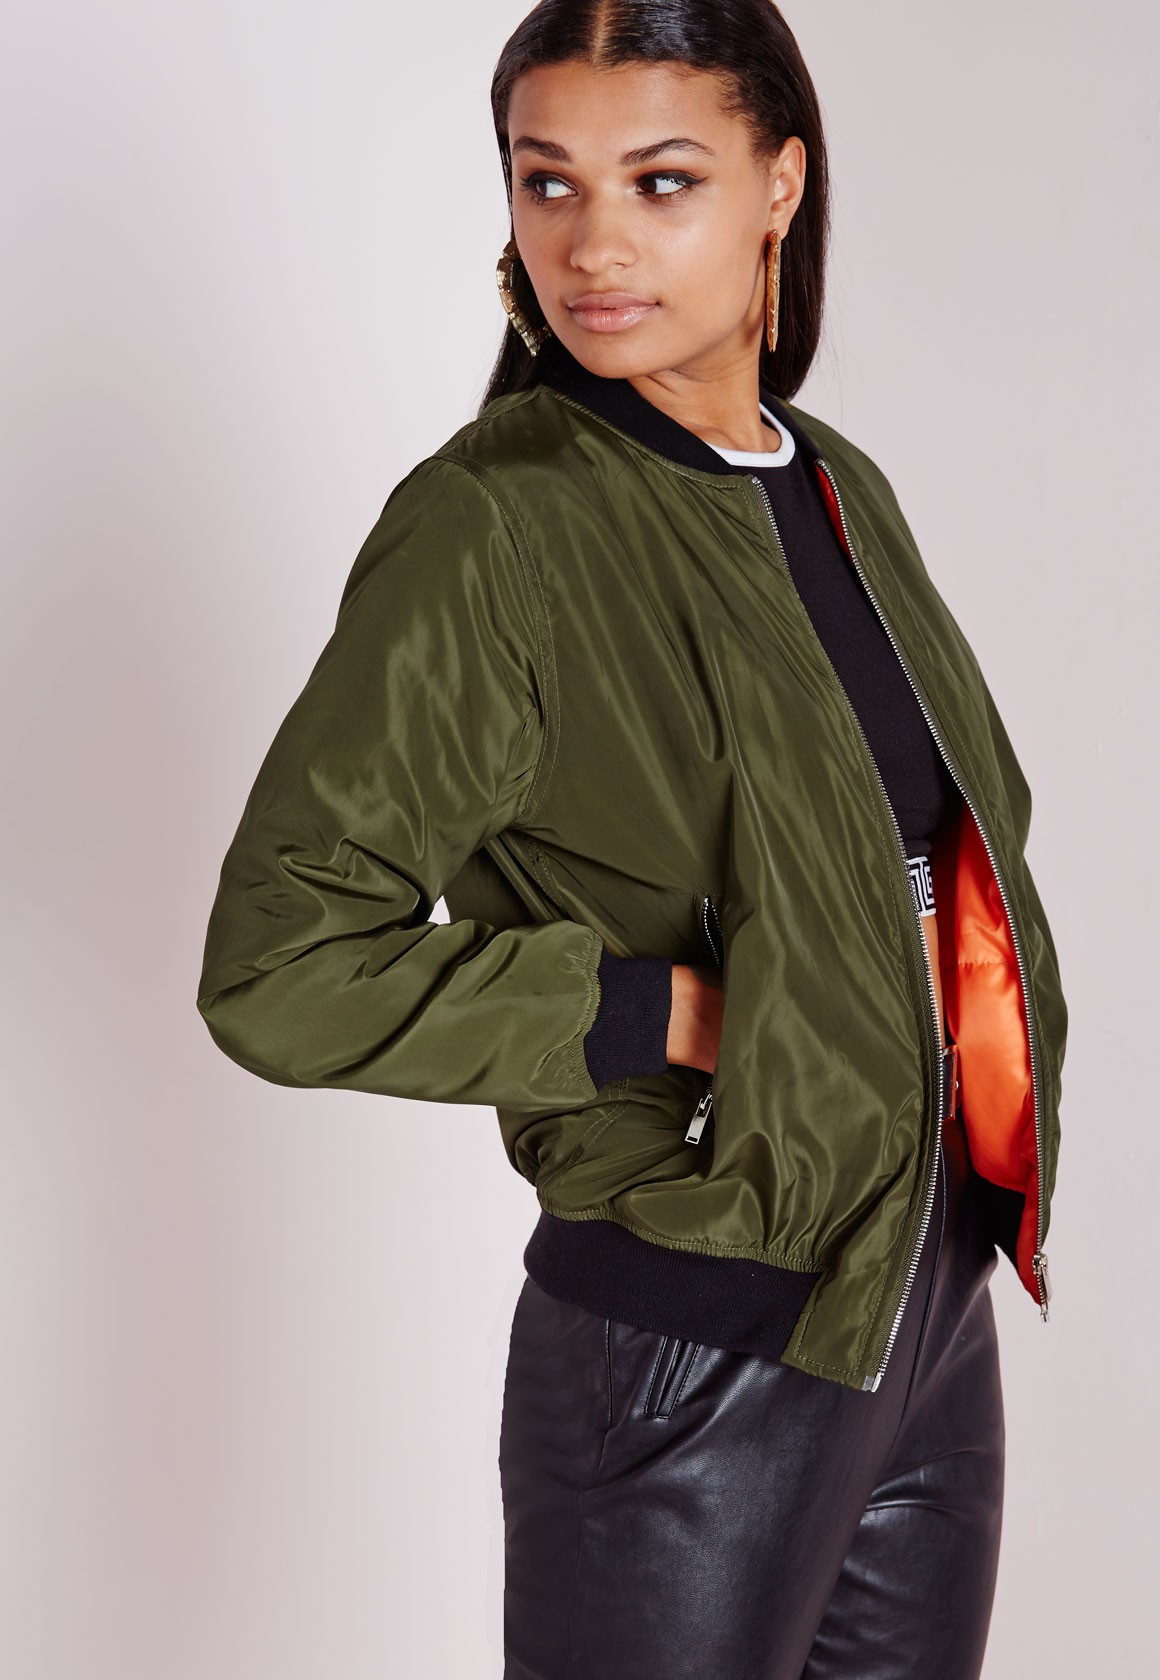 Bomb Product of the Day: MissGuided’s Olive Green Padded Bomber Jacket